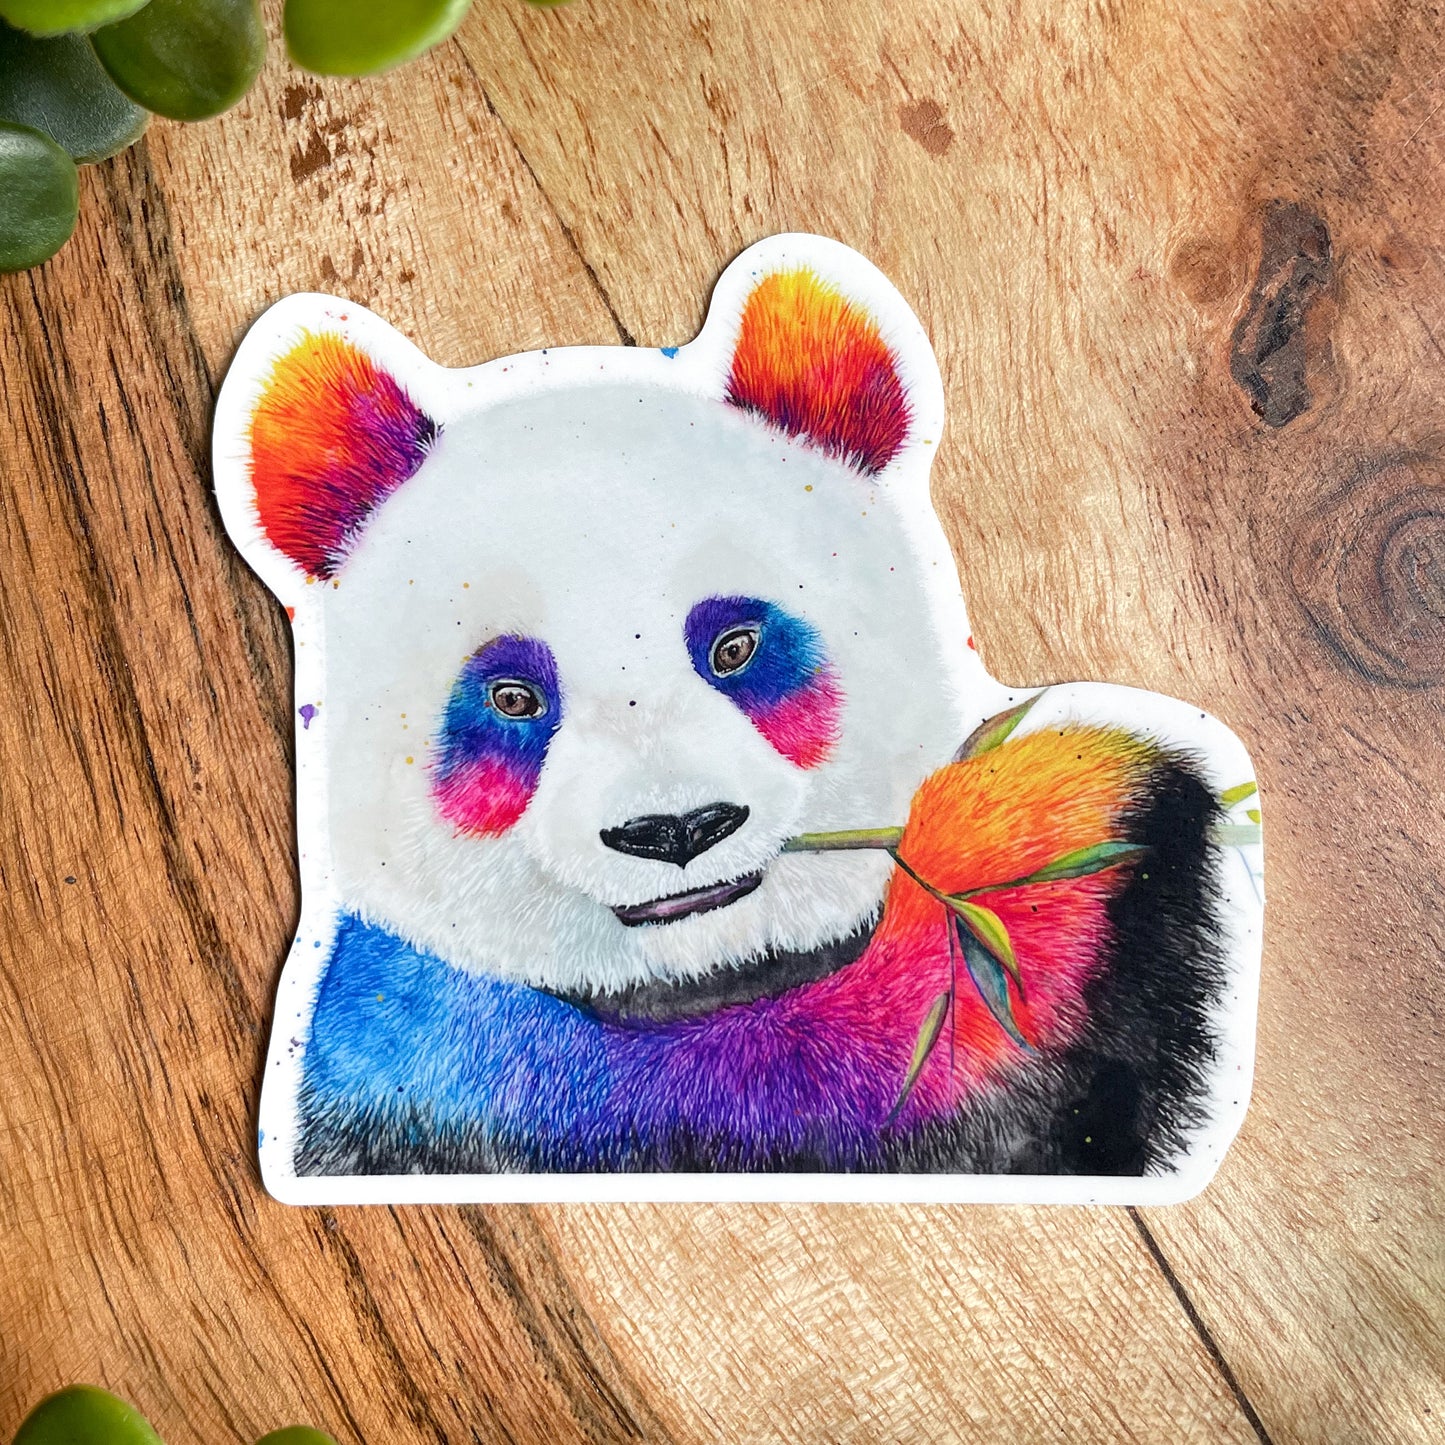 A close-up image of the waterproof, vinyl, dye-cut sticker depicting a watercolor painting from the Wild Planet Creations wild animal collection of a giant panda.